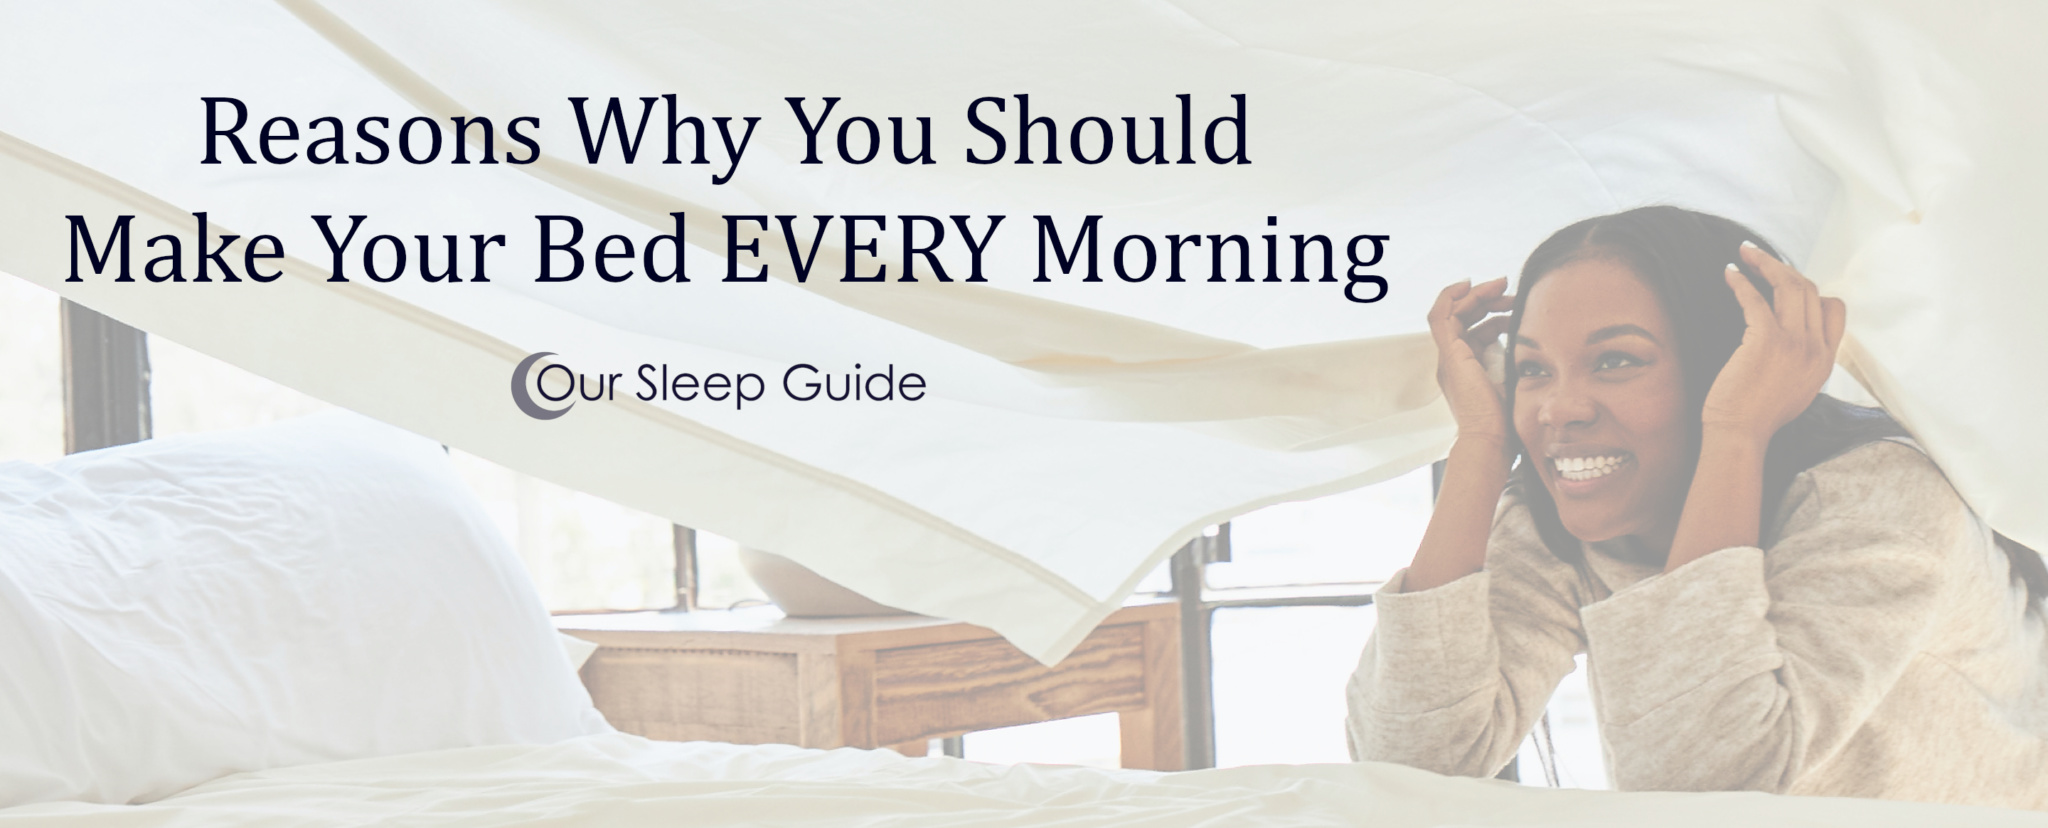 make your bed every morning speech